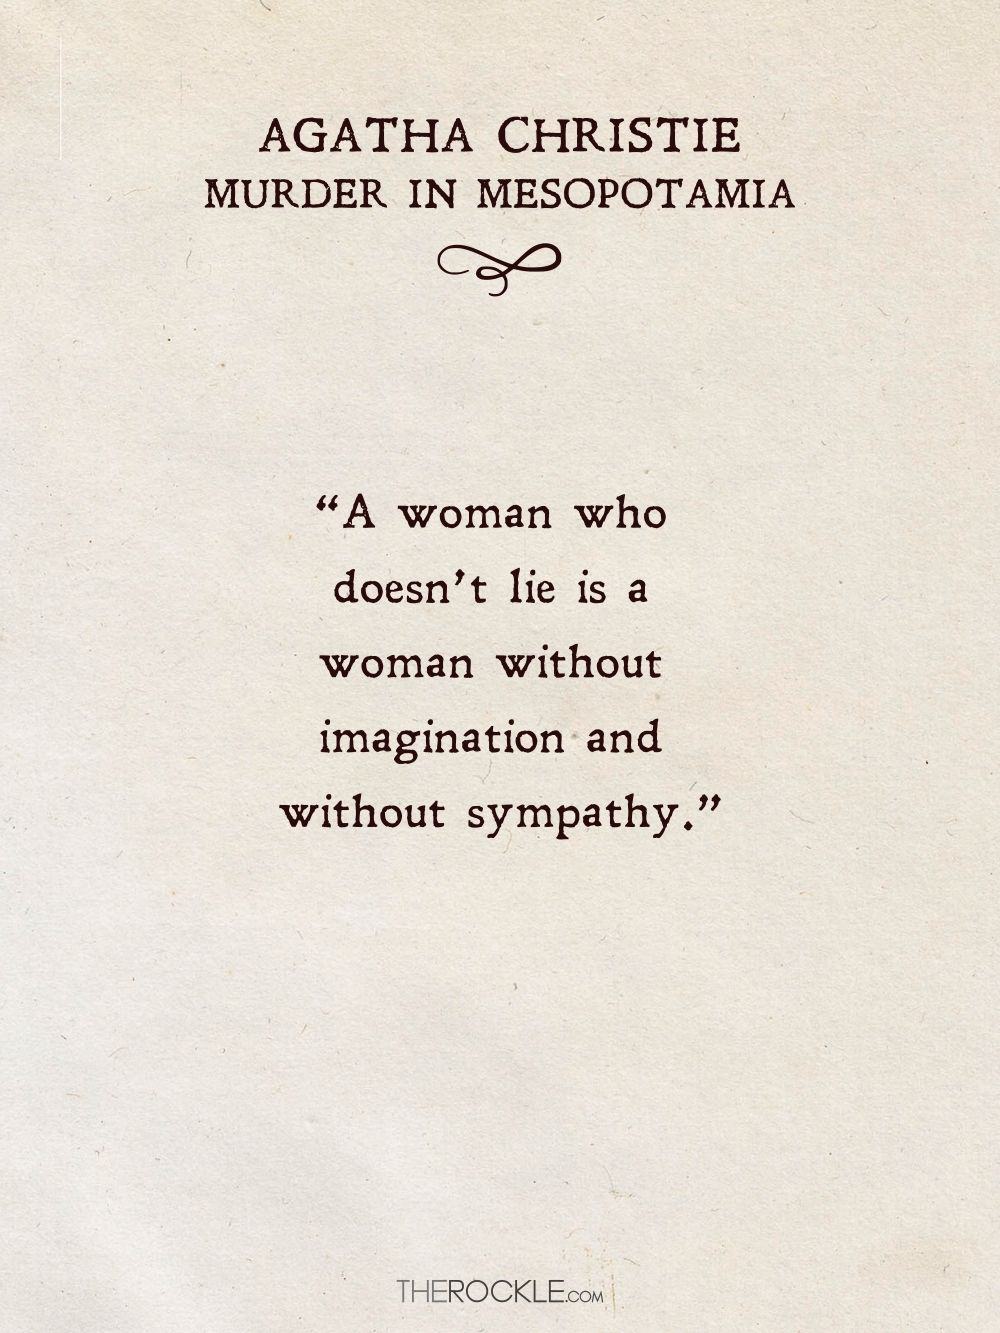 “A woman who doesn't lie is a woman without imagination and without sympathy.” ― Agatha Christie, Murder in Mesopotamia